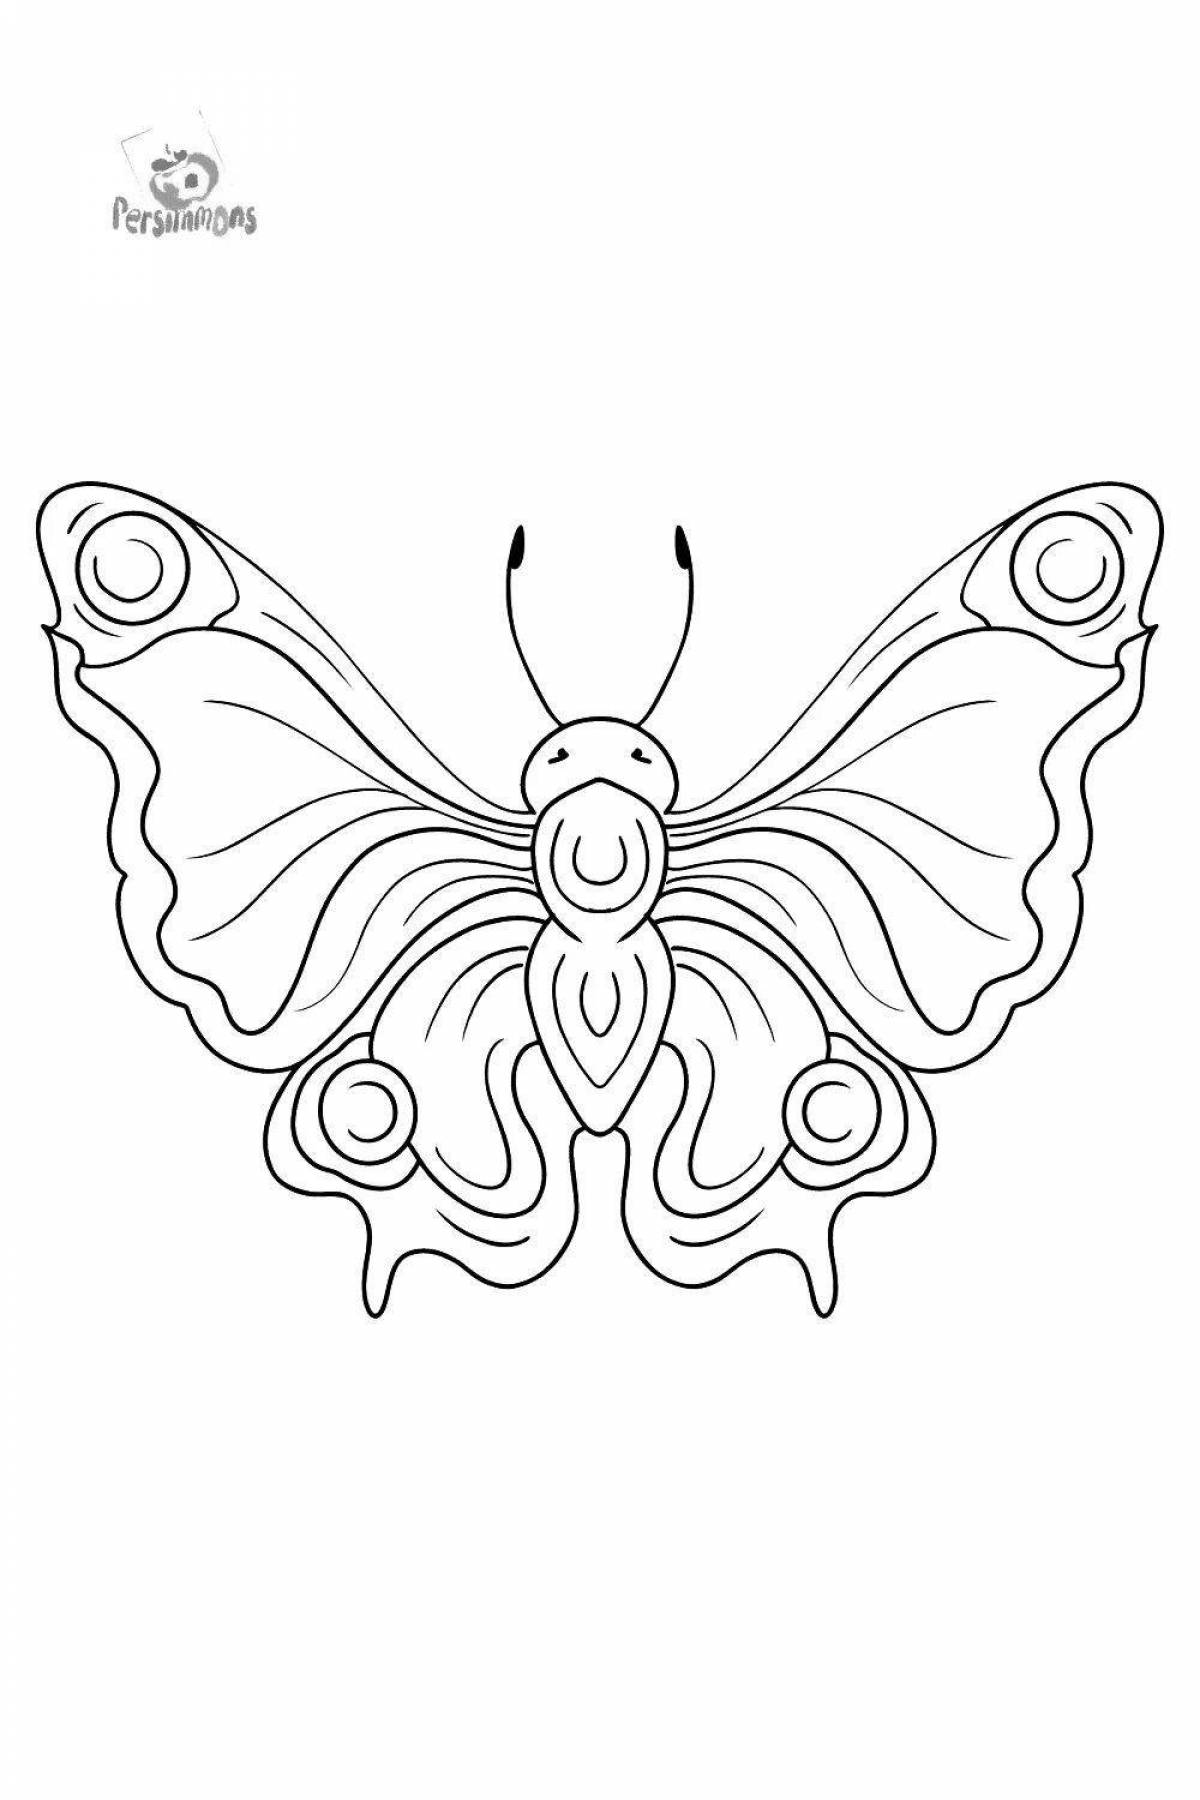 Elegant peacock butterfly coloring book